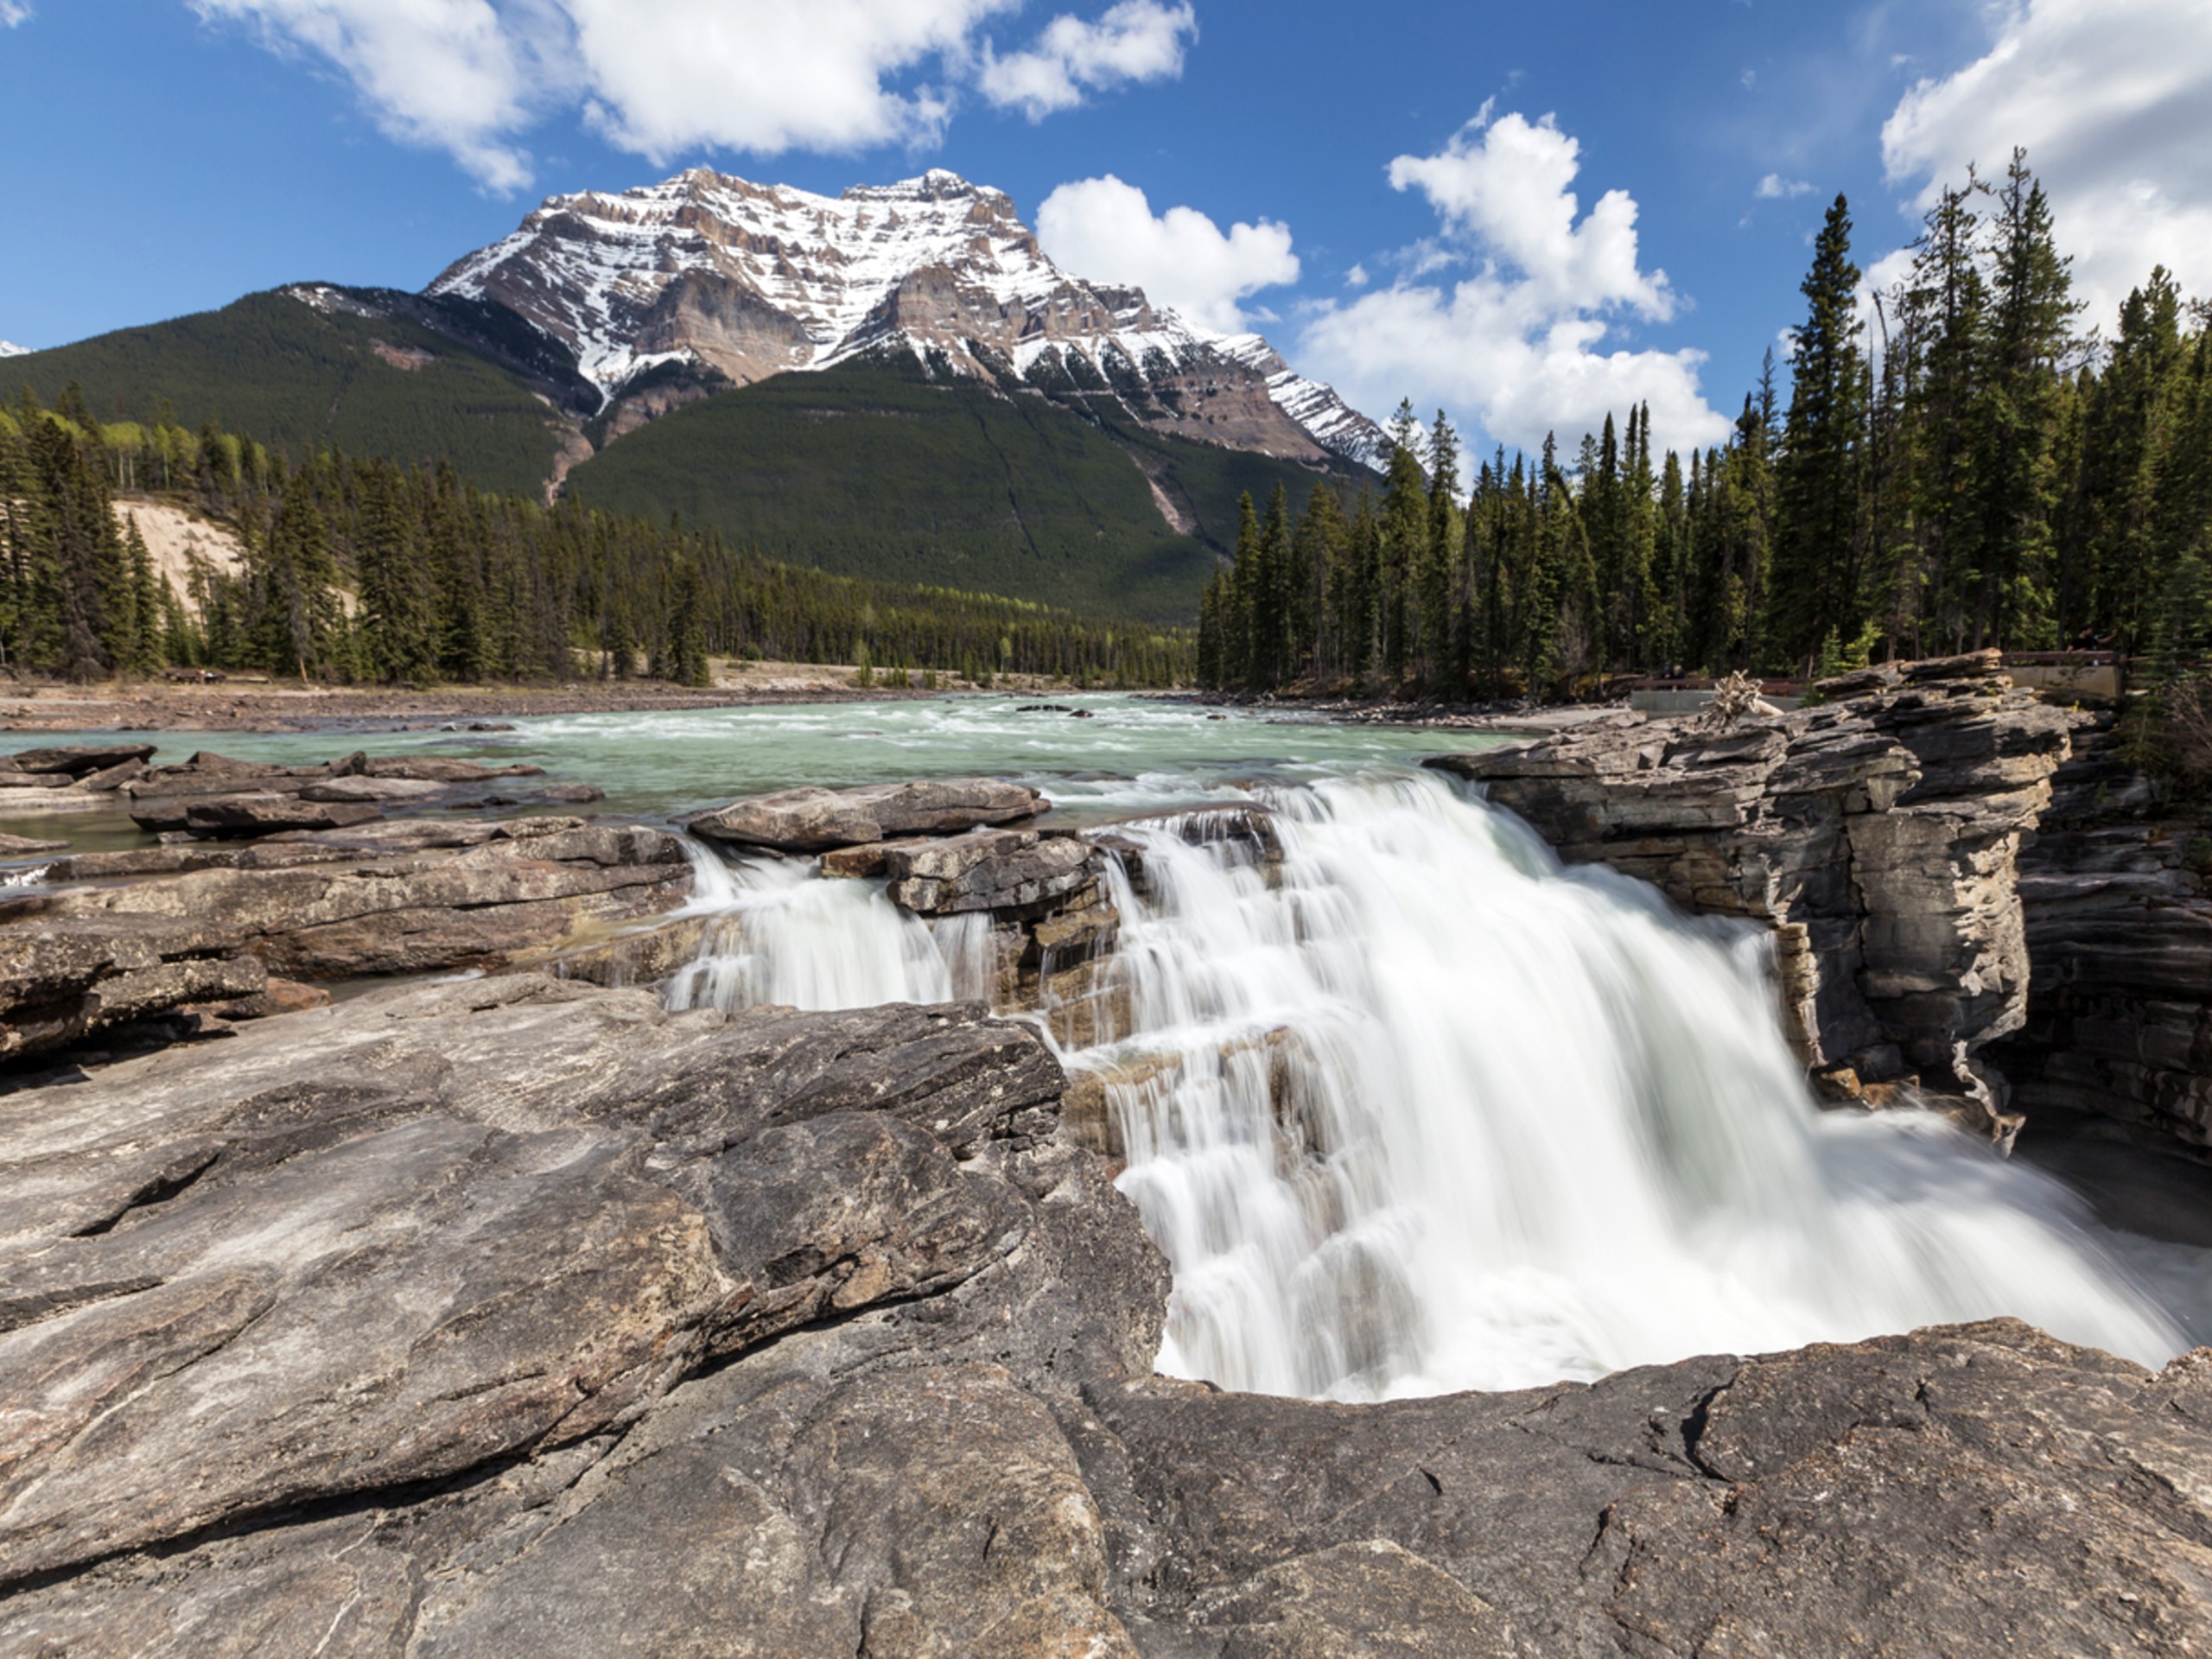 Athabasca falls, visited on guided biking tour from Jasper to Banff